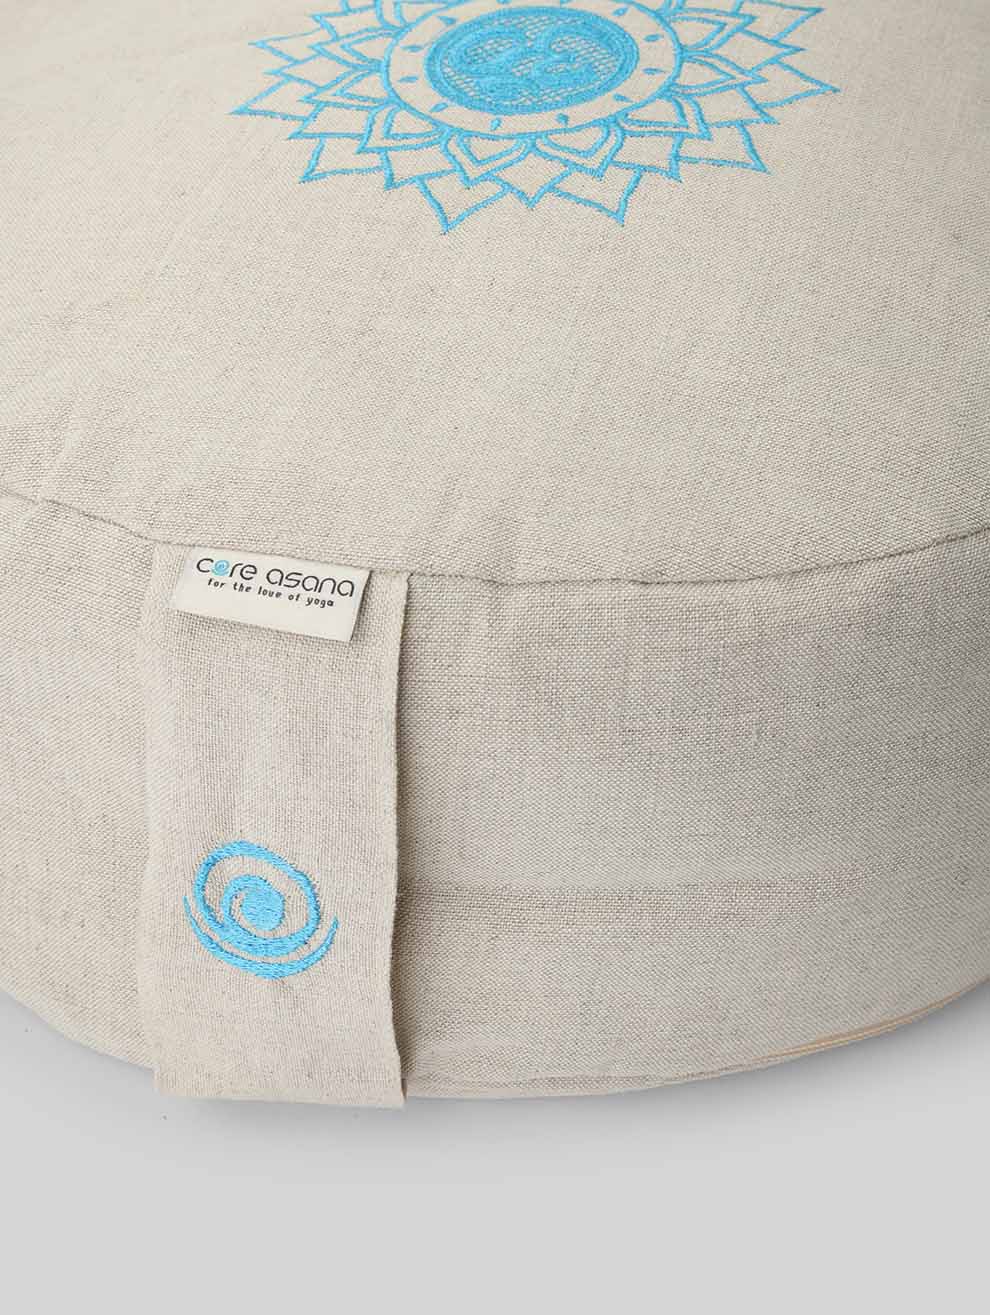 Meditation Pillows, Cushions, and Mats for Sale – Gaiam Meditation